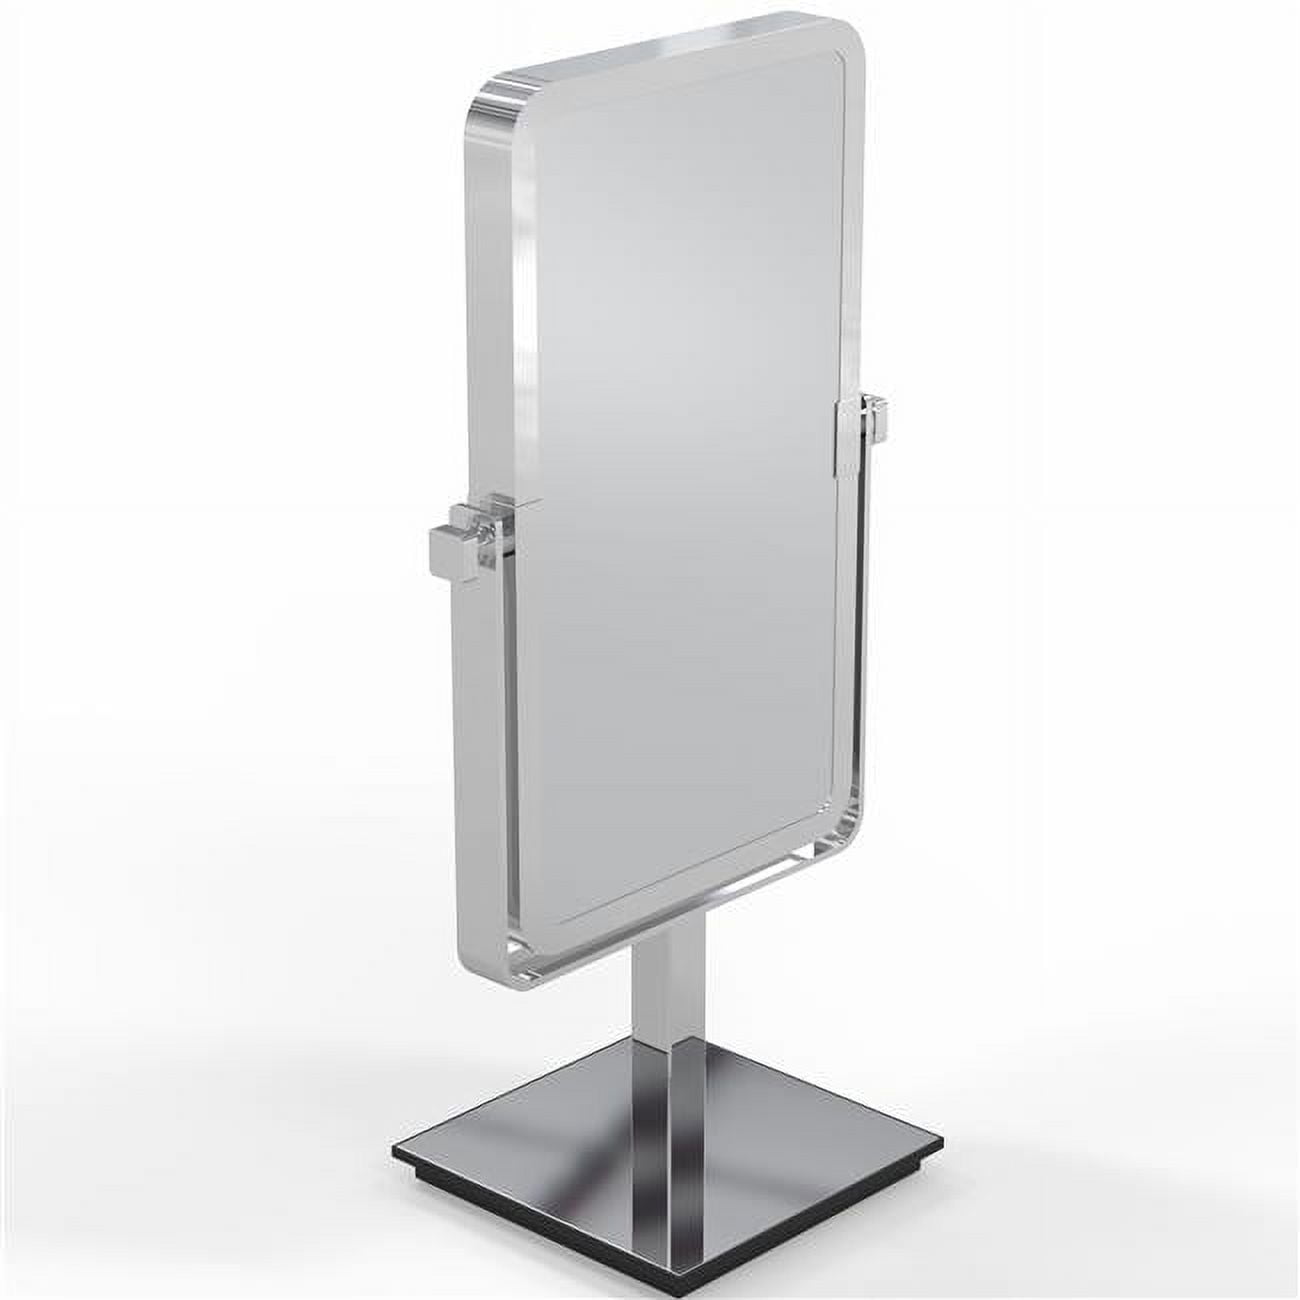 Americanflat Adhesive Mirror Tiles - Exclamation Rectangular Design - Peel  And Stick Mirrors For Wall. (4pcs Set) : Target